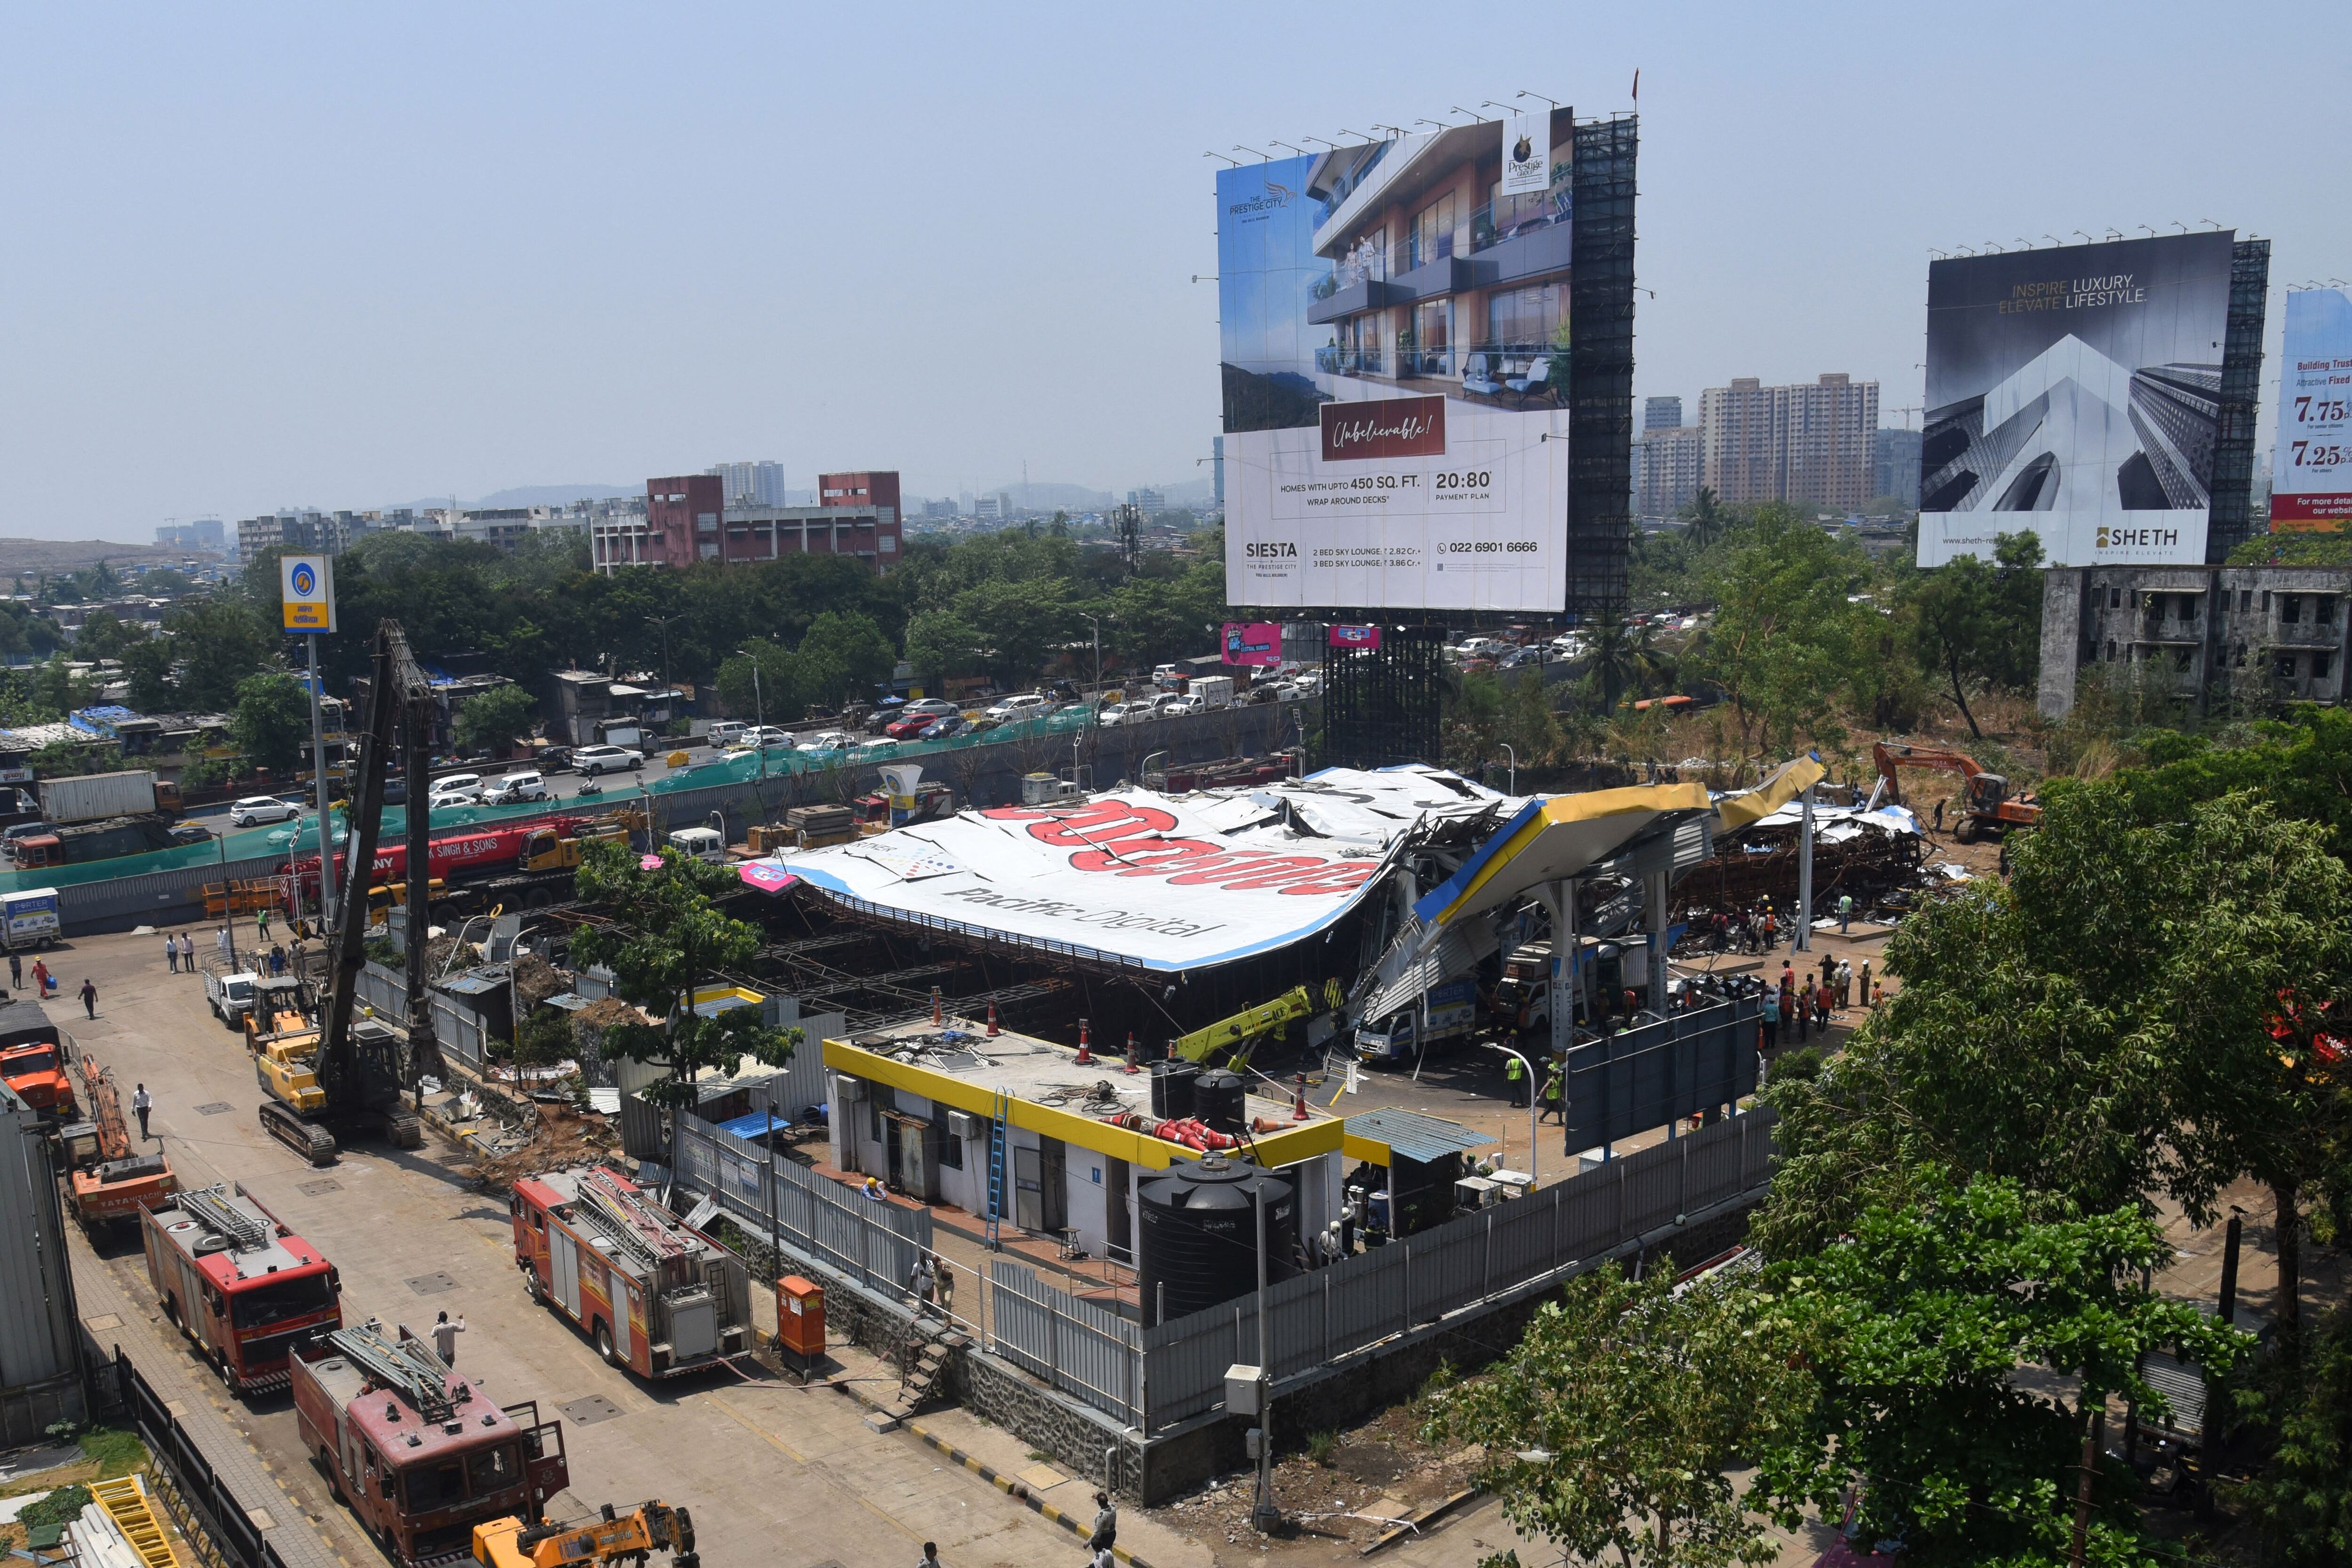 Emergency vehicles are seen parked at the scene a day after a billboard collapsed at a gas station following a storm, in Mumbai on May 14, 2024. (Photo by Imtiyaz SHAIKH/AFP)